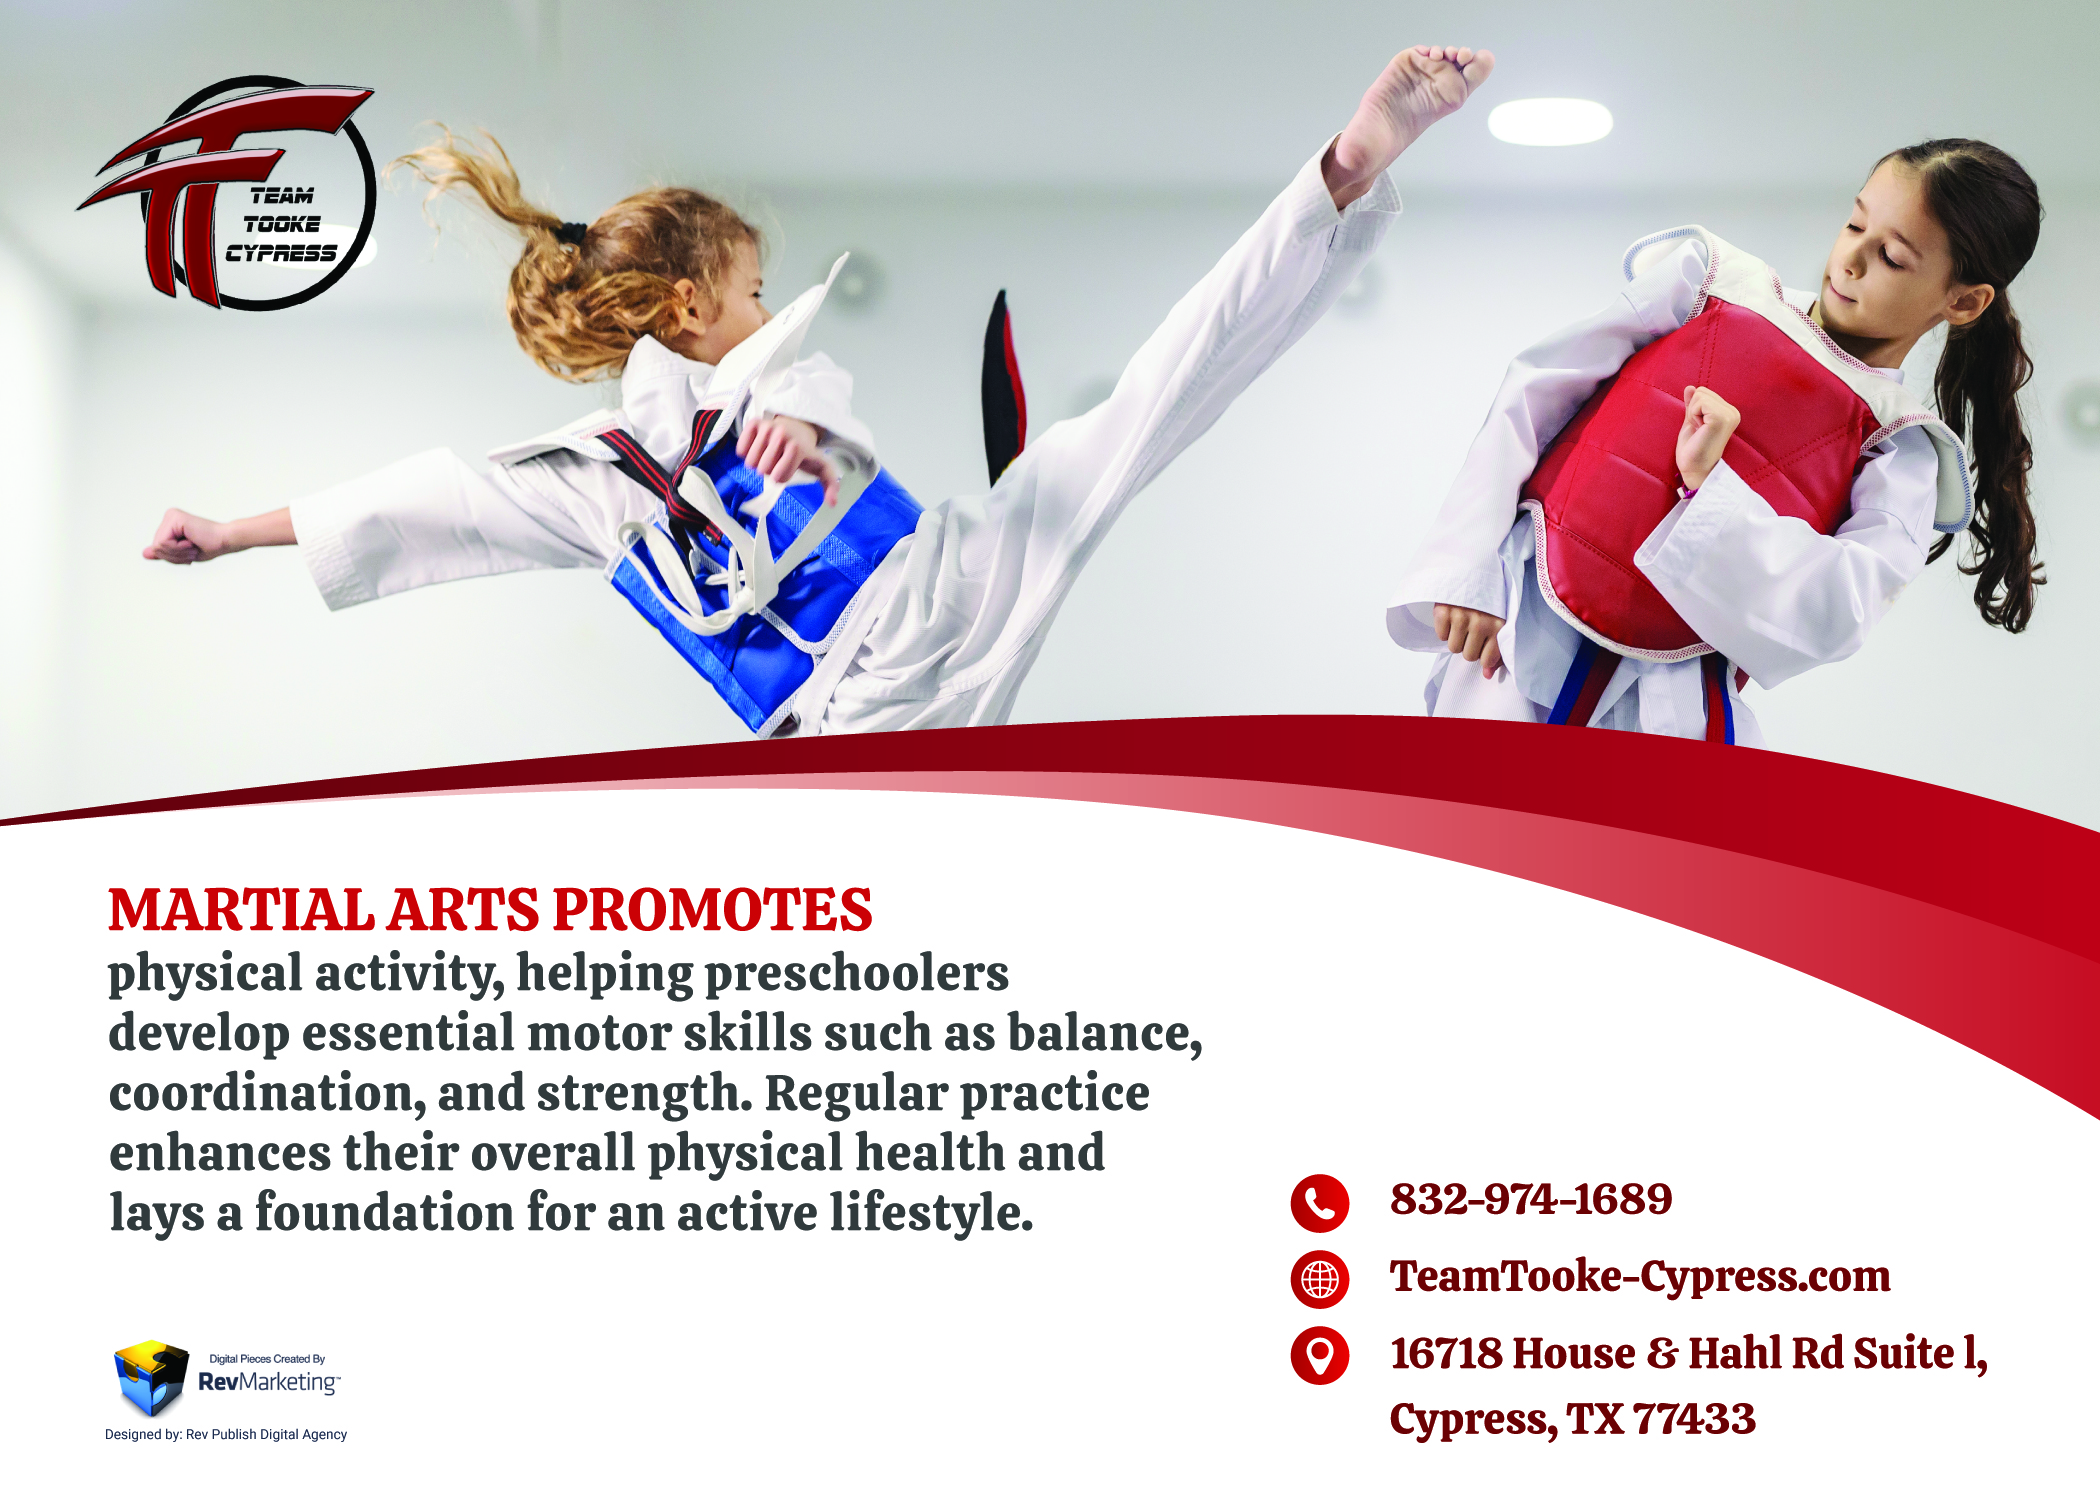 Martial Arts Classes for Young Children